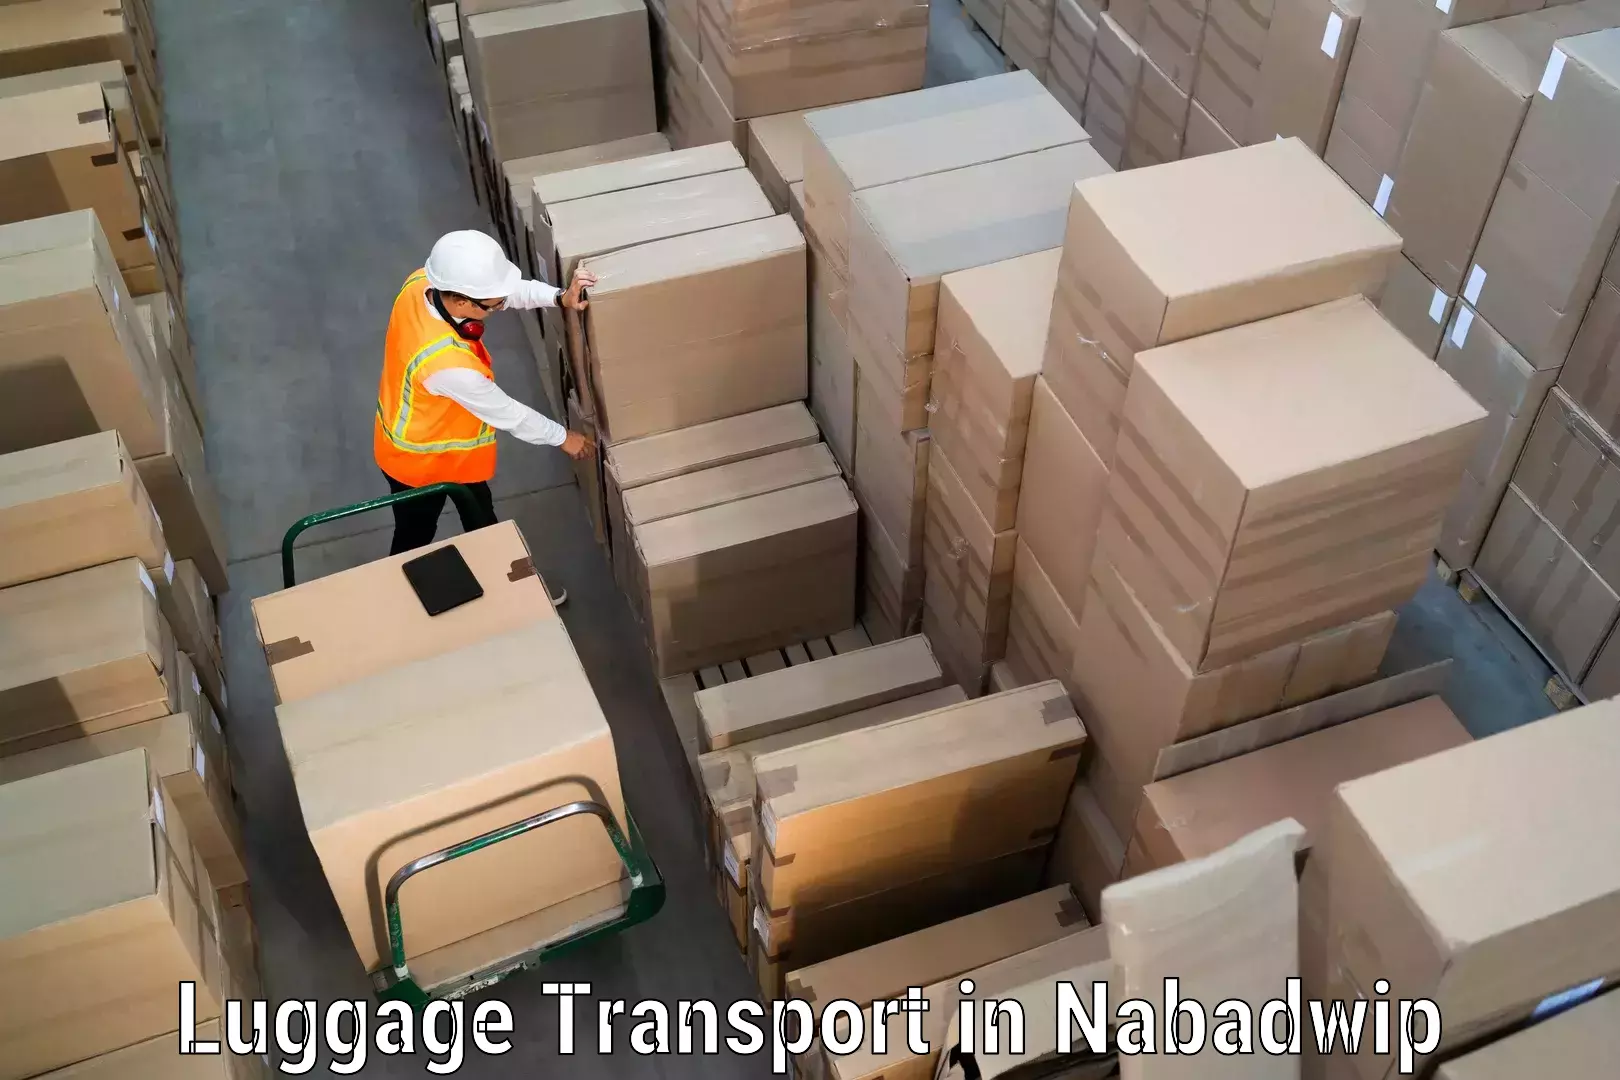 Professional baggage transport in Nabadwip